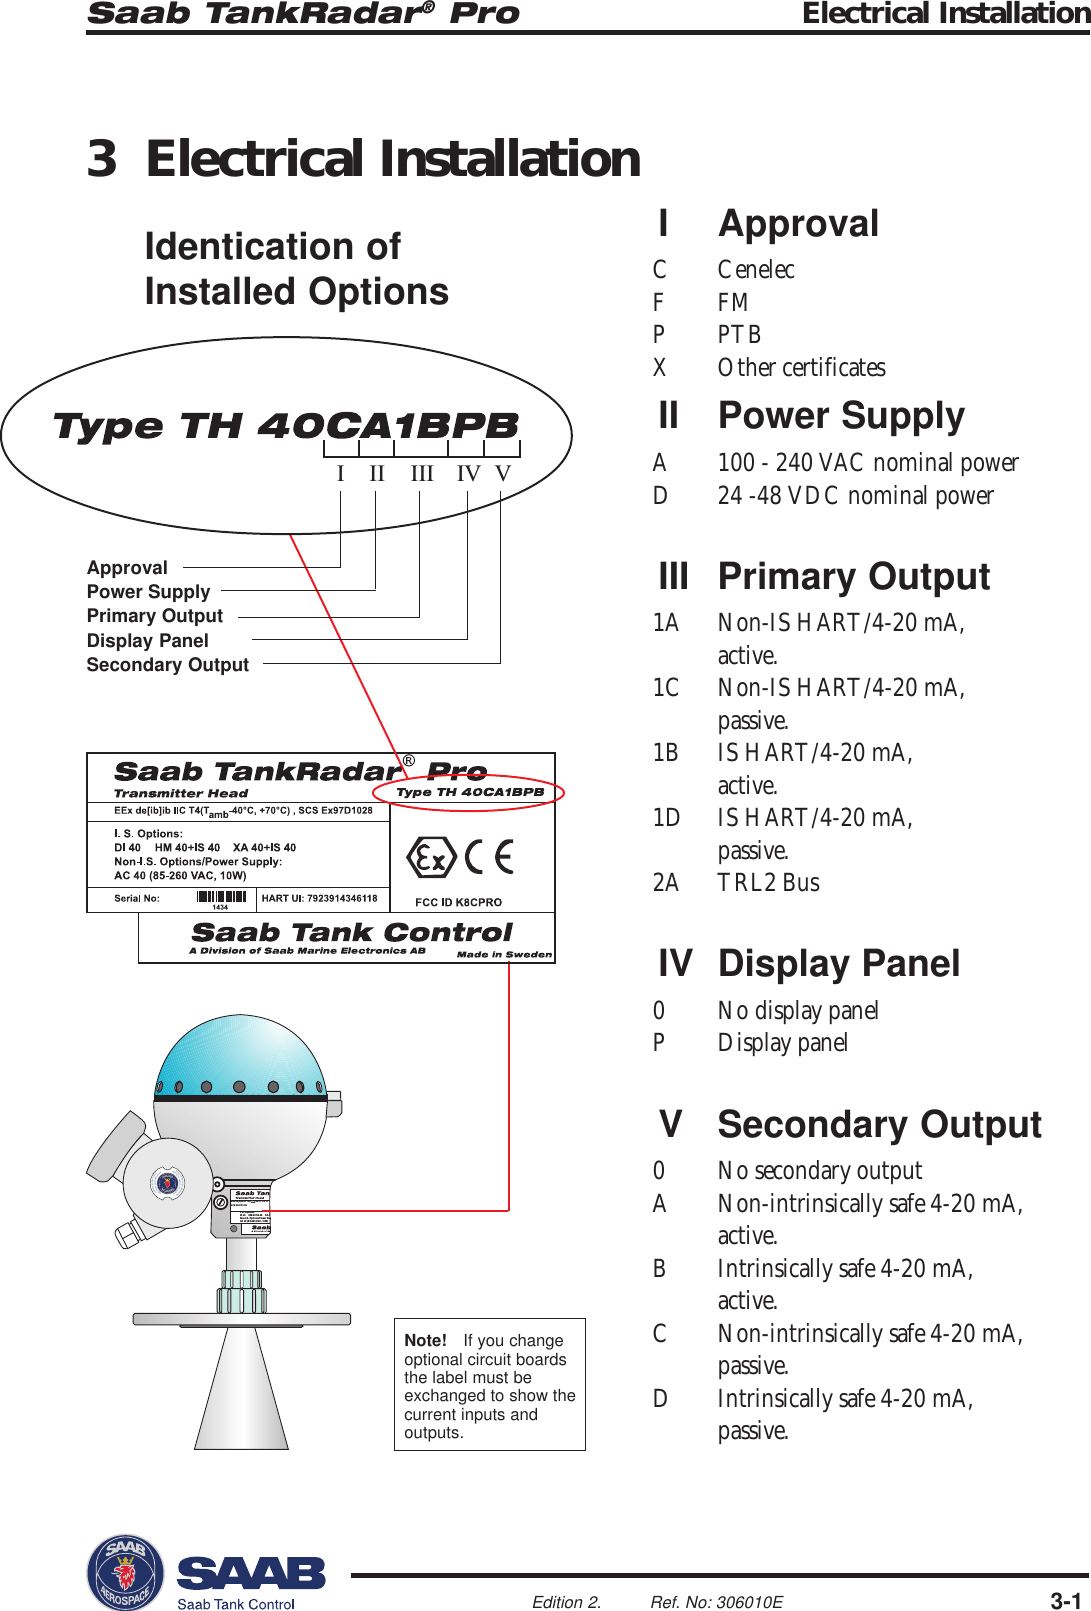 Saab TankRadar® Pro Electrical Installation3-1Edition 2. Ref. No: 306010EFCC ID K8CPROEEx de[ib]ib IIC T4(Tamb-40°C, +70°C)I. S. Options:DI 40 HM 40+IS 40 XA 40+IS 40Non-I.S. Options/Power Supply:AC 40 (85-260 VAC, 10W)Serial No:1434SCS Ex97D1028NEPASOUVRIRSOUSTENSION.HAZARDOUSATMOSPHERESDONOTOPENWHENENERGIZED.TOPREVENTIGNITIONOFI II III IV VApprovalPower SupplyPrimary OutputDisplay PanelSecondary Output3 Electrical InstallationIdentication ofInstalled OptionsI ApprovalC CenelecFFMP PTBX Other certificatesII Power SupplyA 100 - 240 VAC nominal powerD 24 -48 VDC nominal powerIII Primary Output1A Non-IS HART/4-20 mA,active.1C Non-IS HART/4-20 mA,passive.1B IS HART/4-20 mA,active.1D IS HART/4-20 mA,passive.2A TRL2 BusIV Display Panel0 No display panelP Display panelV Secondary Output0 No secondary outputA Non-intrinsically safe 4-20 mA,active.B Intrinsically safe 4-20 mA,active.C Non-intrinsically safe 4-20 mA,passive.D Intrinsically safe 4-20 mA,passive.Note! If you changeoptional circuit boardsthe label must beexchanged to show thecurrent inputs andoutputs.